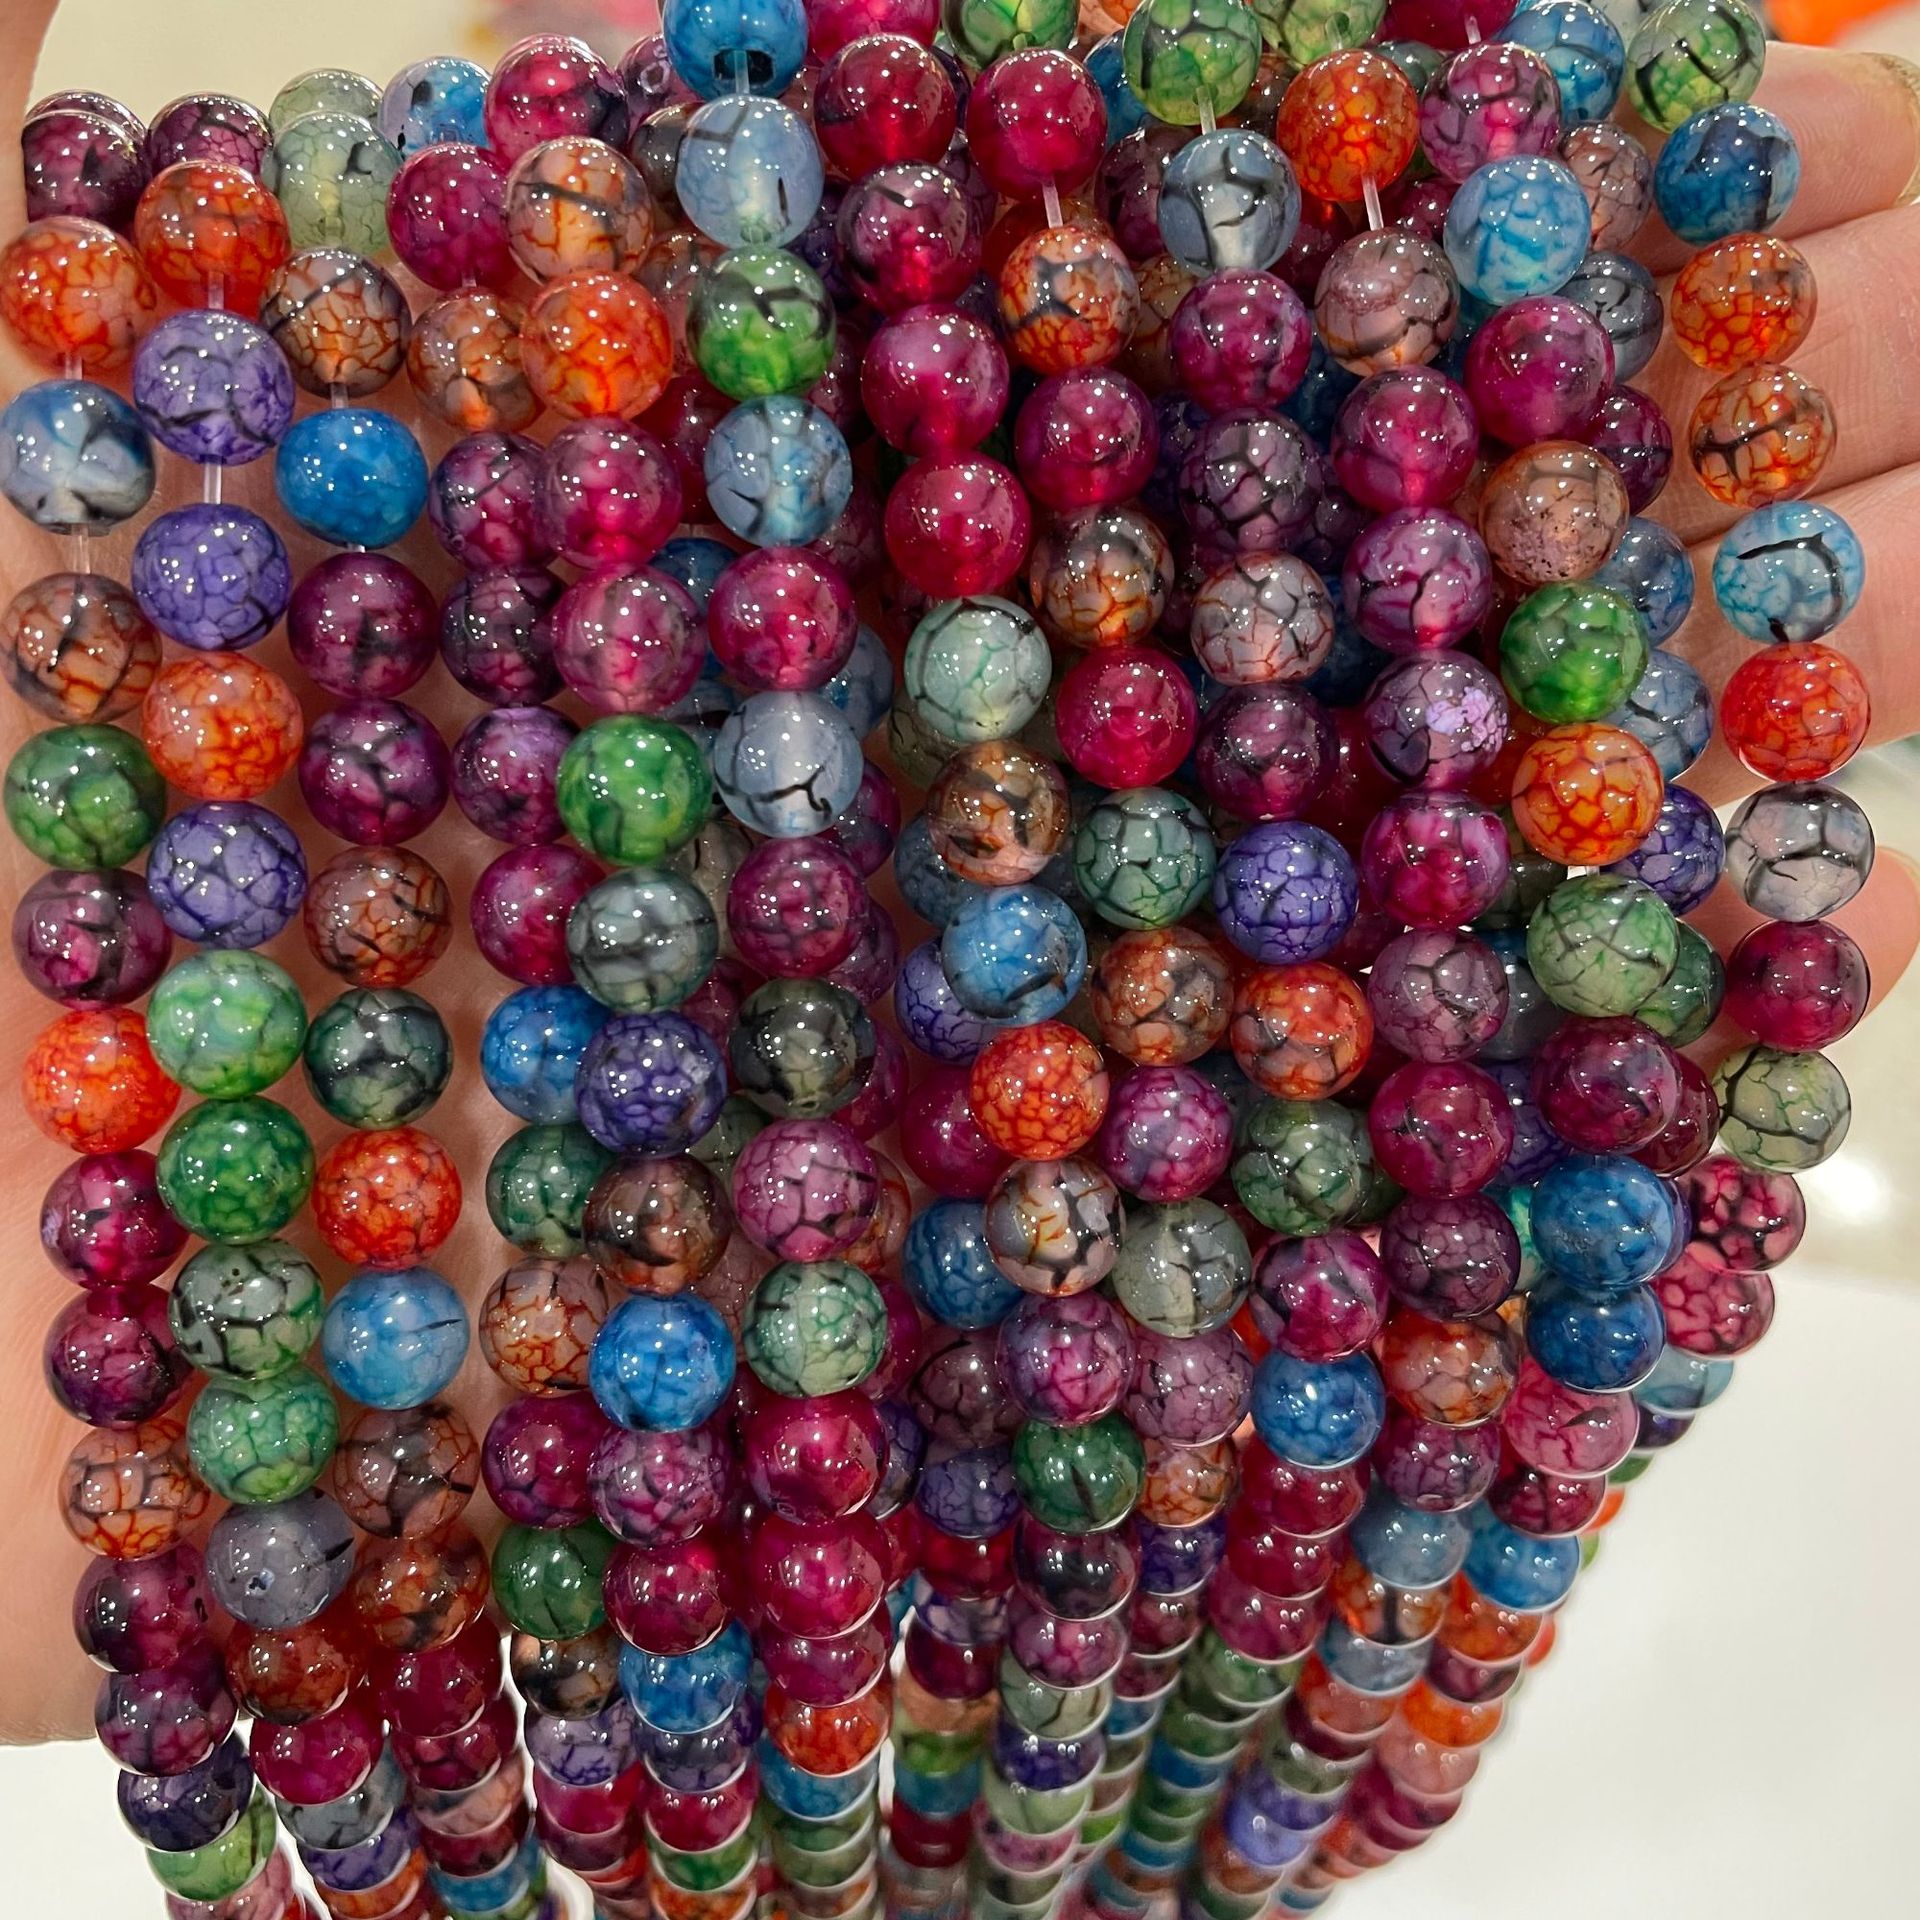 2MM Seed Beads For Jewelry Making 1000pcs Crystal Lampwork Glass Waist  Beads For Bracelets Bangles DIY Crafts Charms Accessories - Buy 2MM Seed  Beads For Jewelry Making 1000pcs Crystal Lampwork Glass Waist